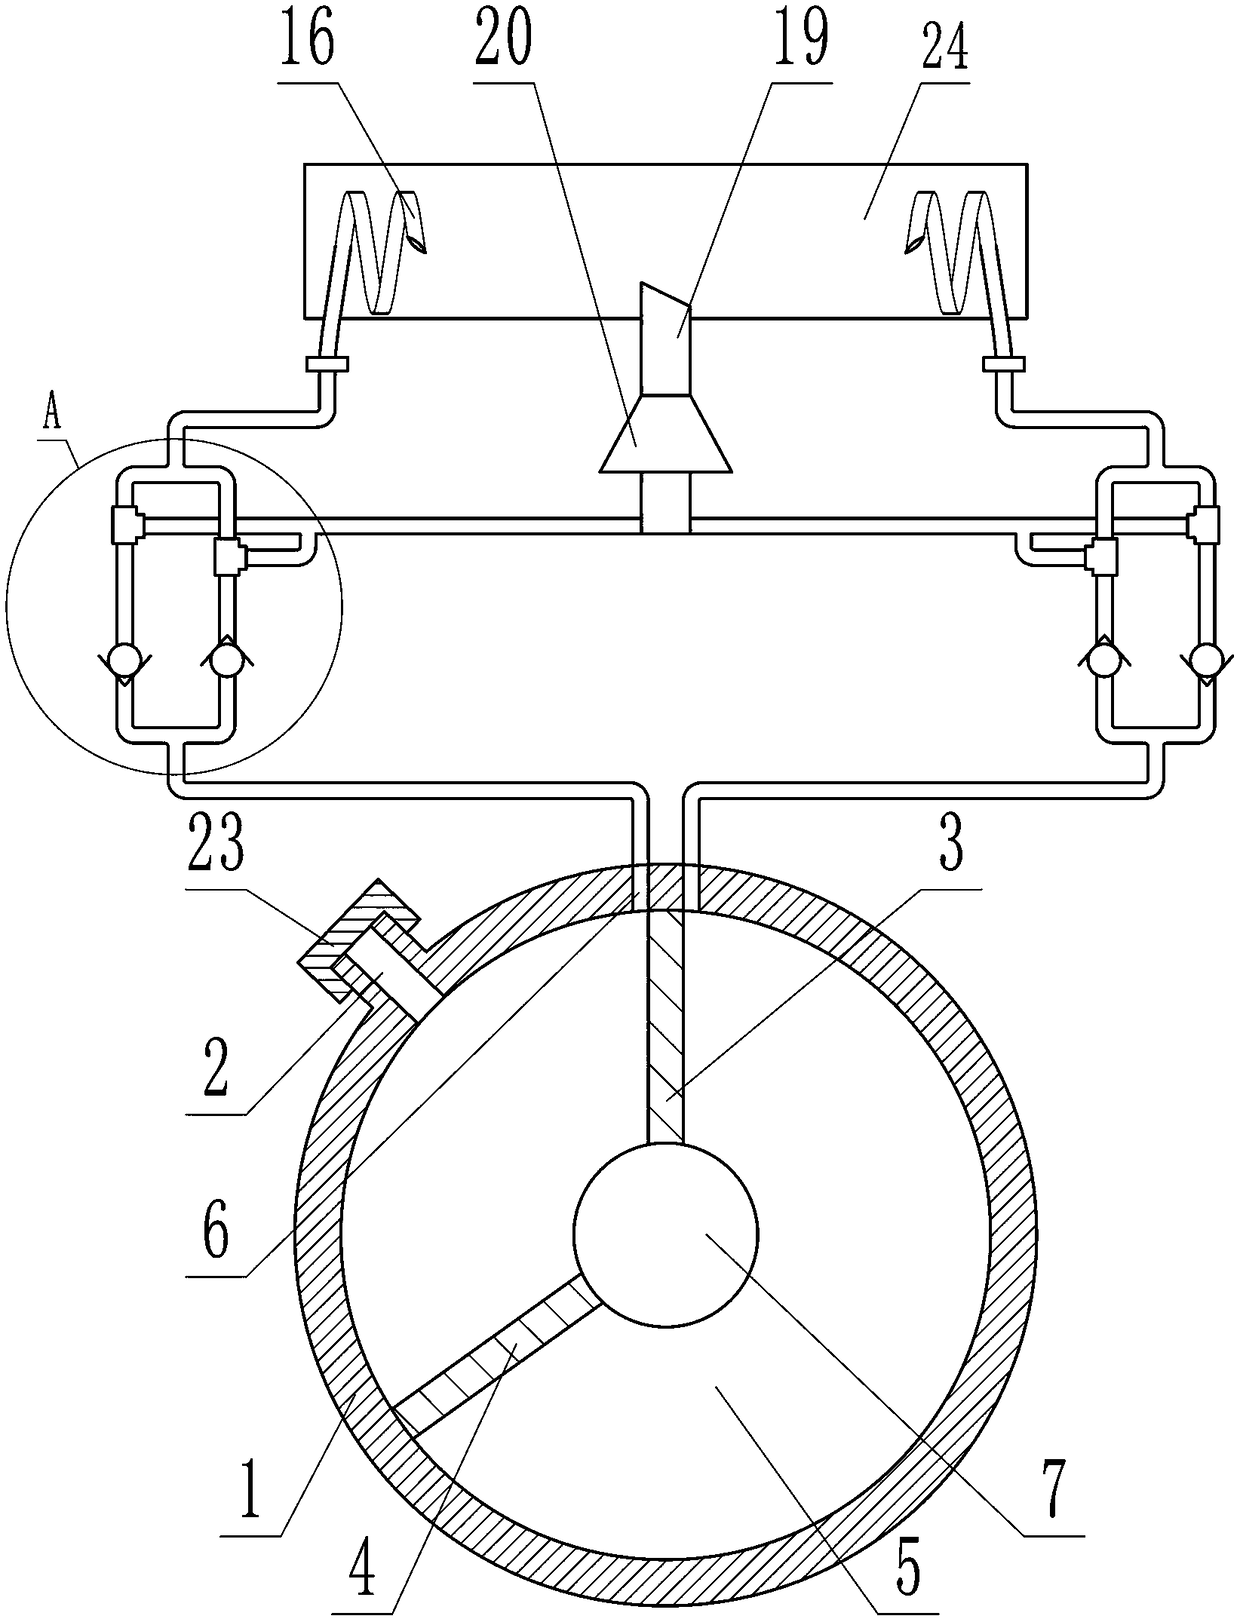 Thrombus induction experimental device